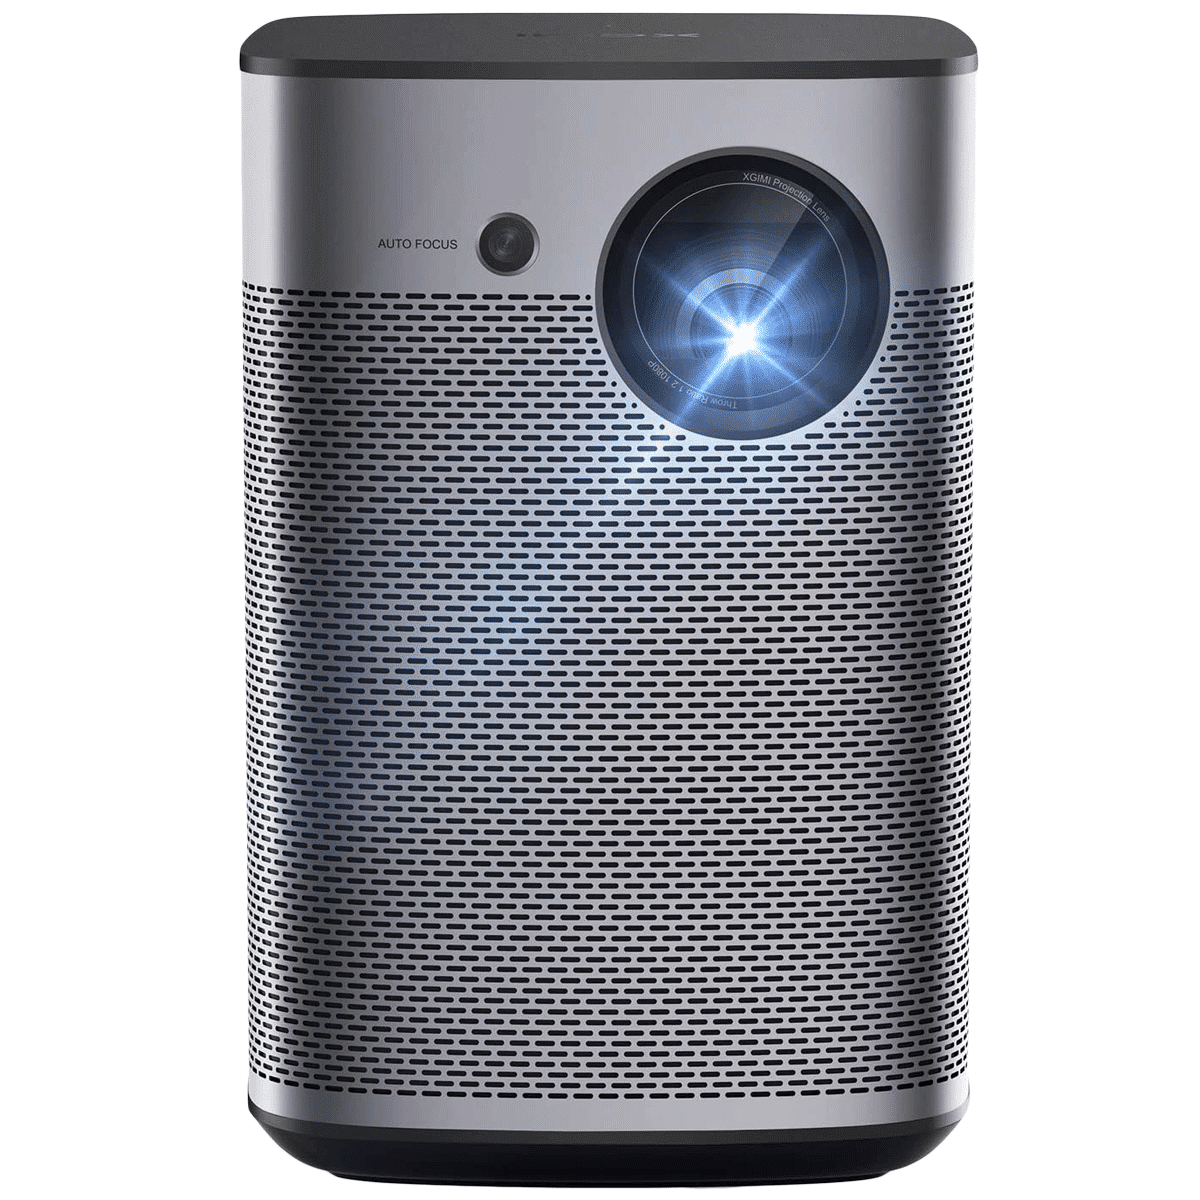 Buy XGIMI Halo 1080p Smart Projector (DLP, 800 ANSI Lumens, Android TV 9.0  + Harman/Kardon Speakers + Indoor/Outdoor Smart Portable Projector with  Google Assistant, White and Aluminium) Online - Croma